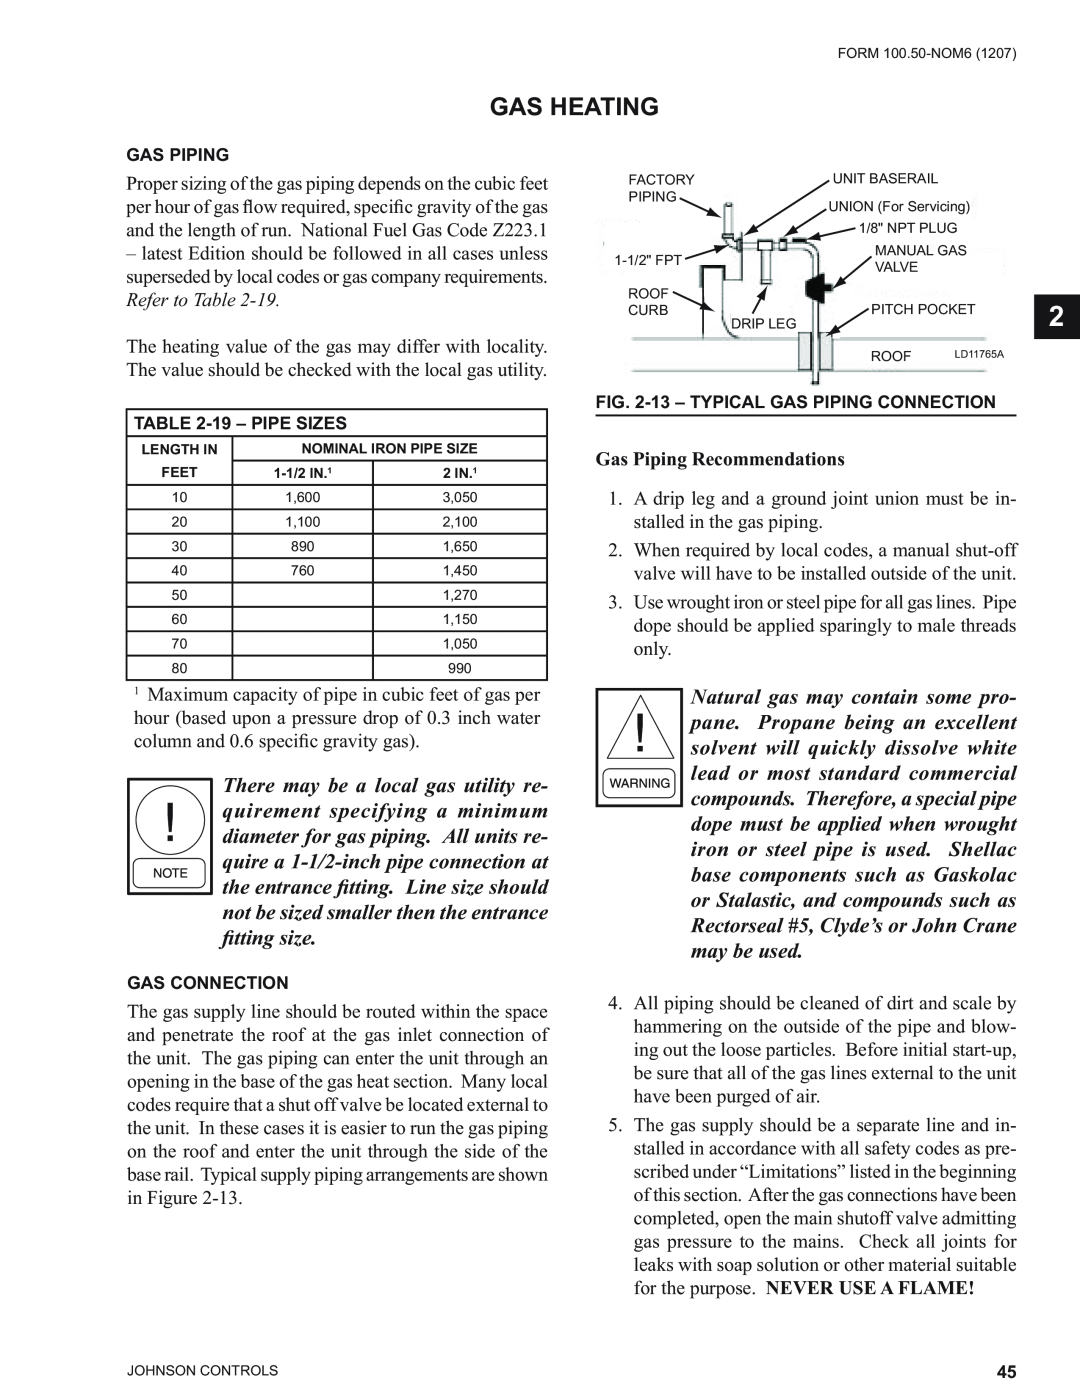 York YPAL 050, YPAL 061, YPAL 051, YPAL 060 manual Gas Heating, Gas Piping Recommendations 